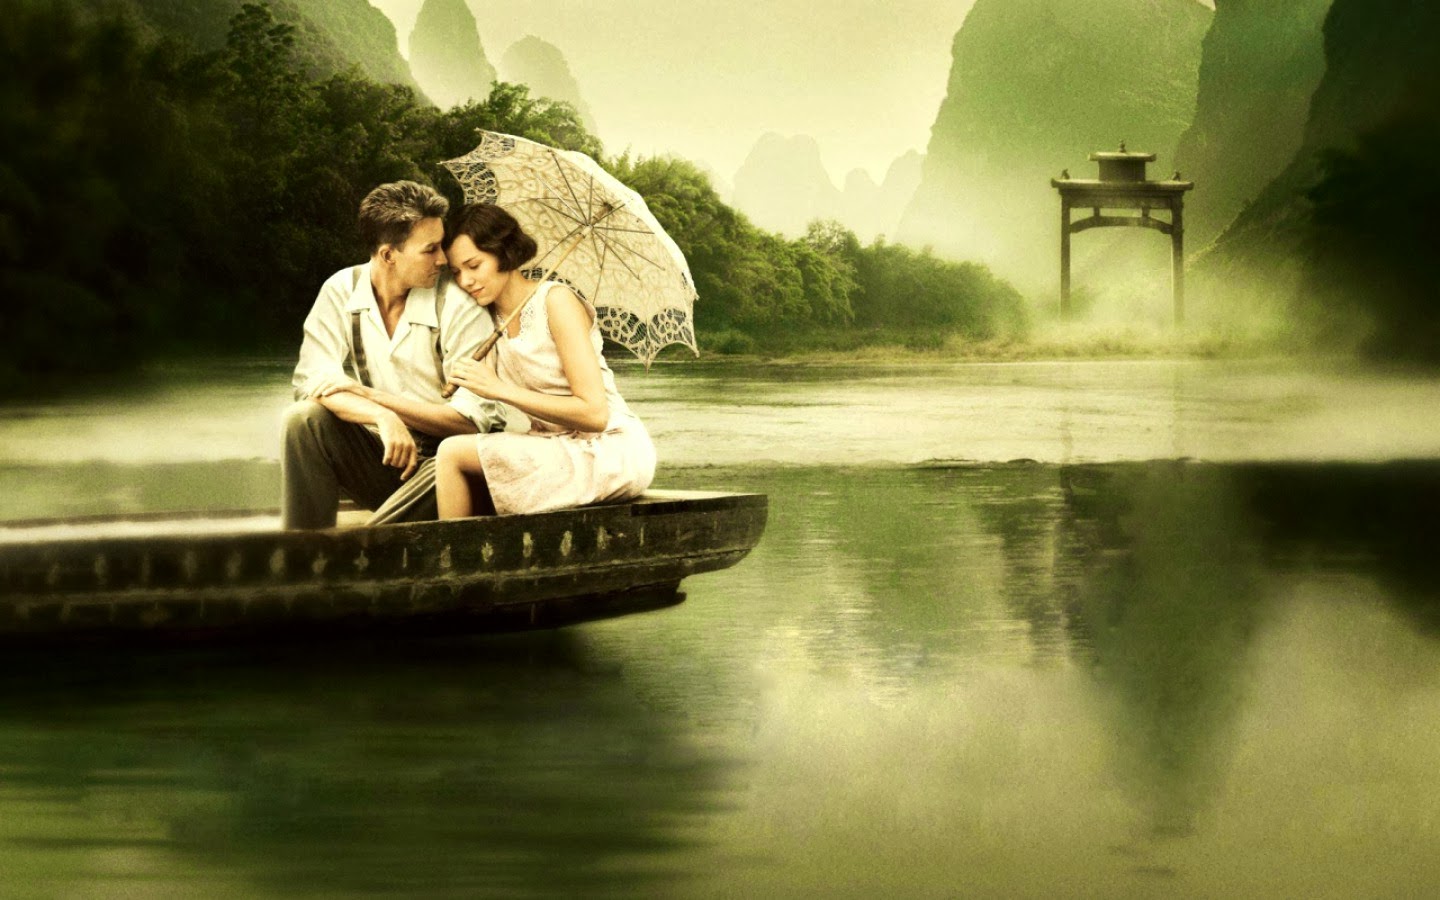 So Here We Are Providing HD Wallpaper And Image Of Romantic Couple